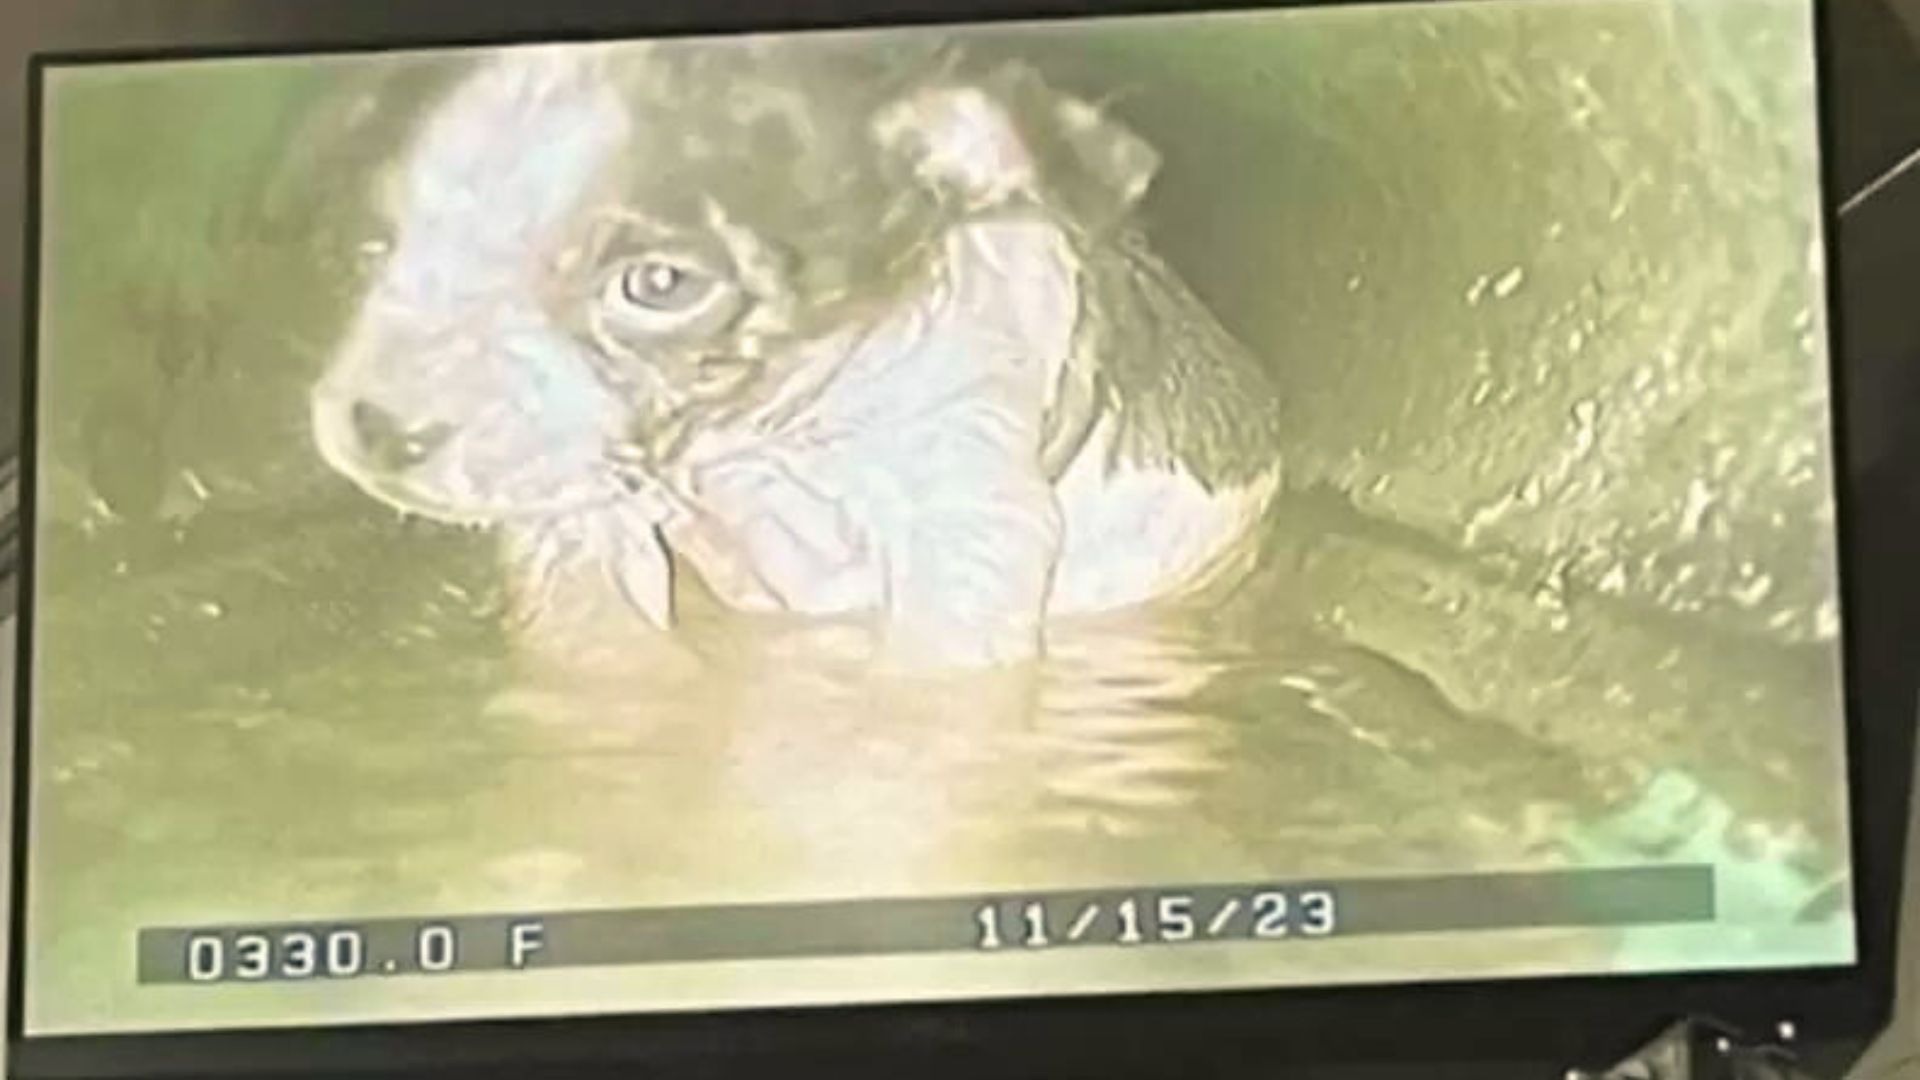 Rescuers Were Shocked When They Found A Small Puppy In The Sewer Drain